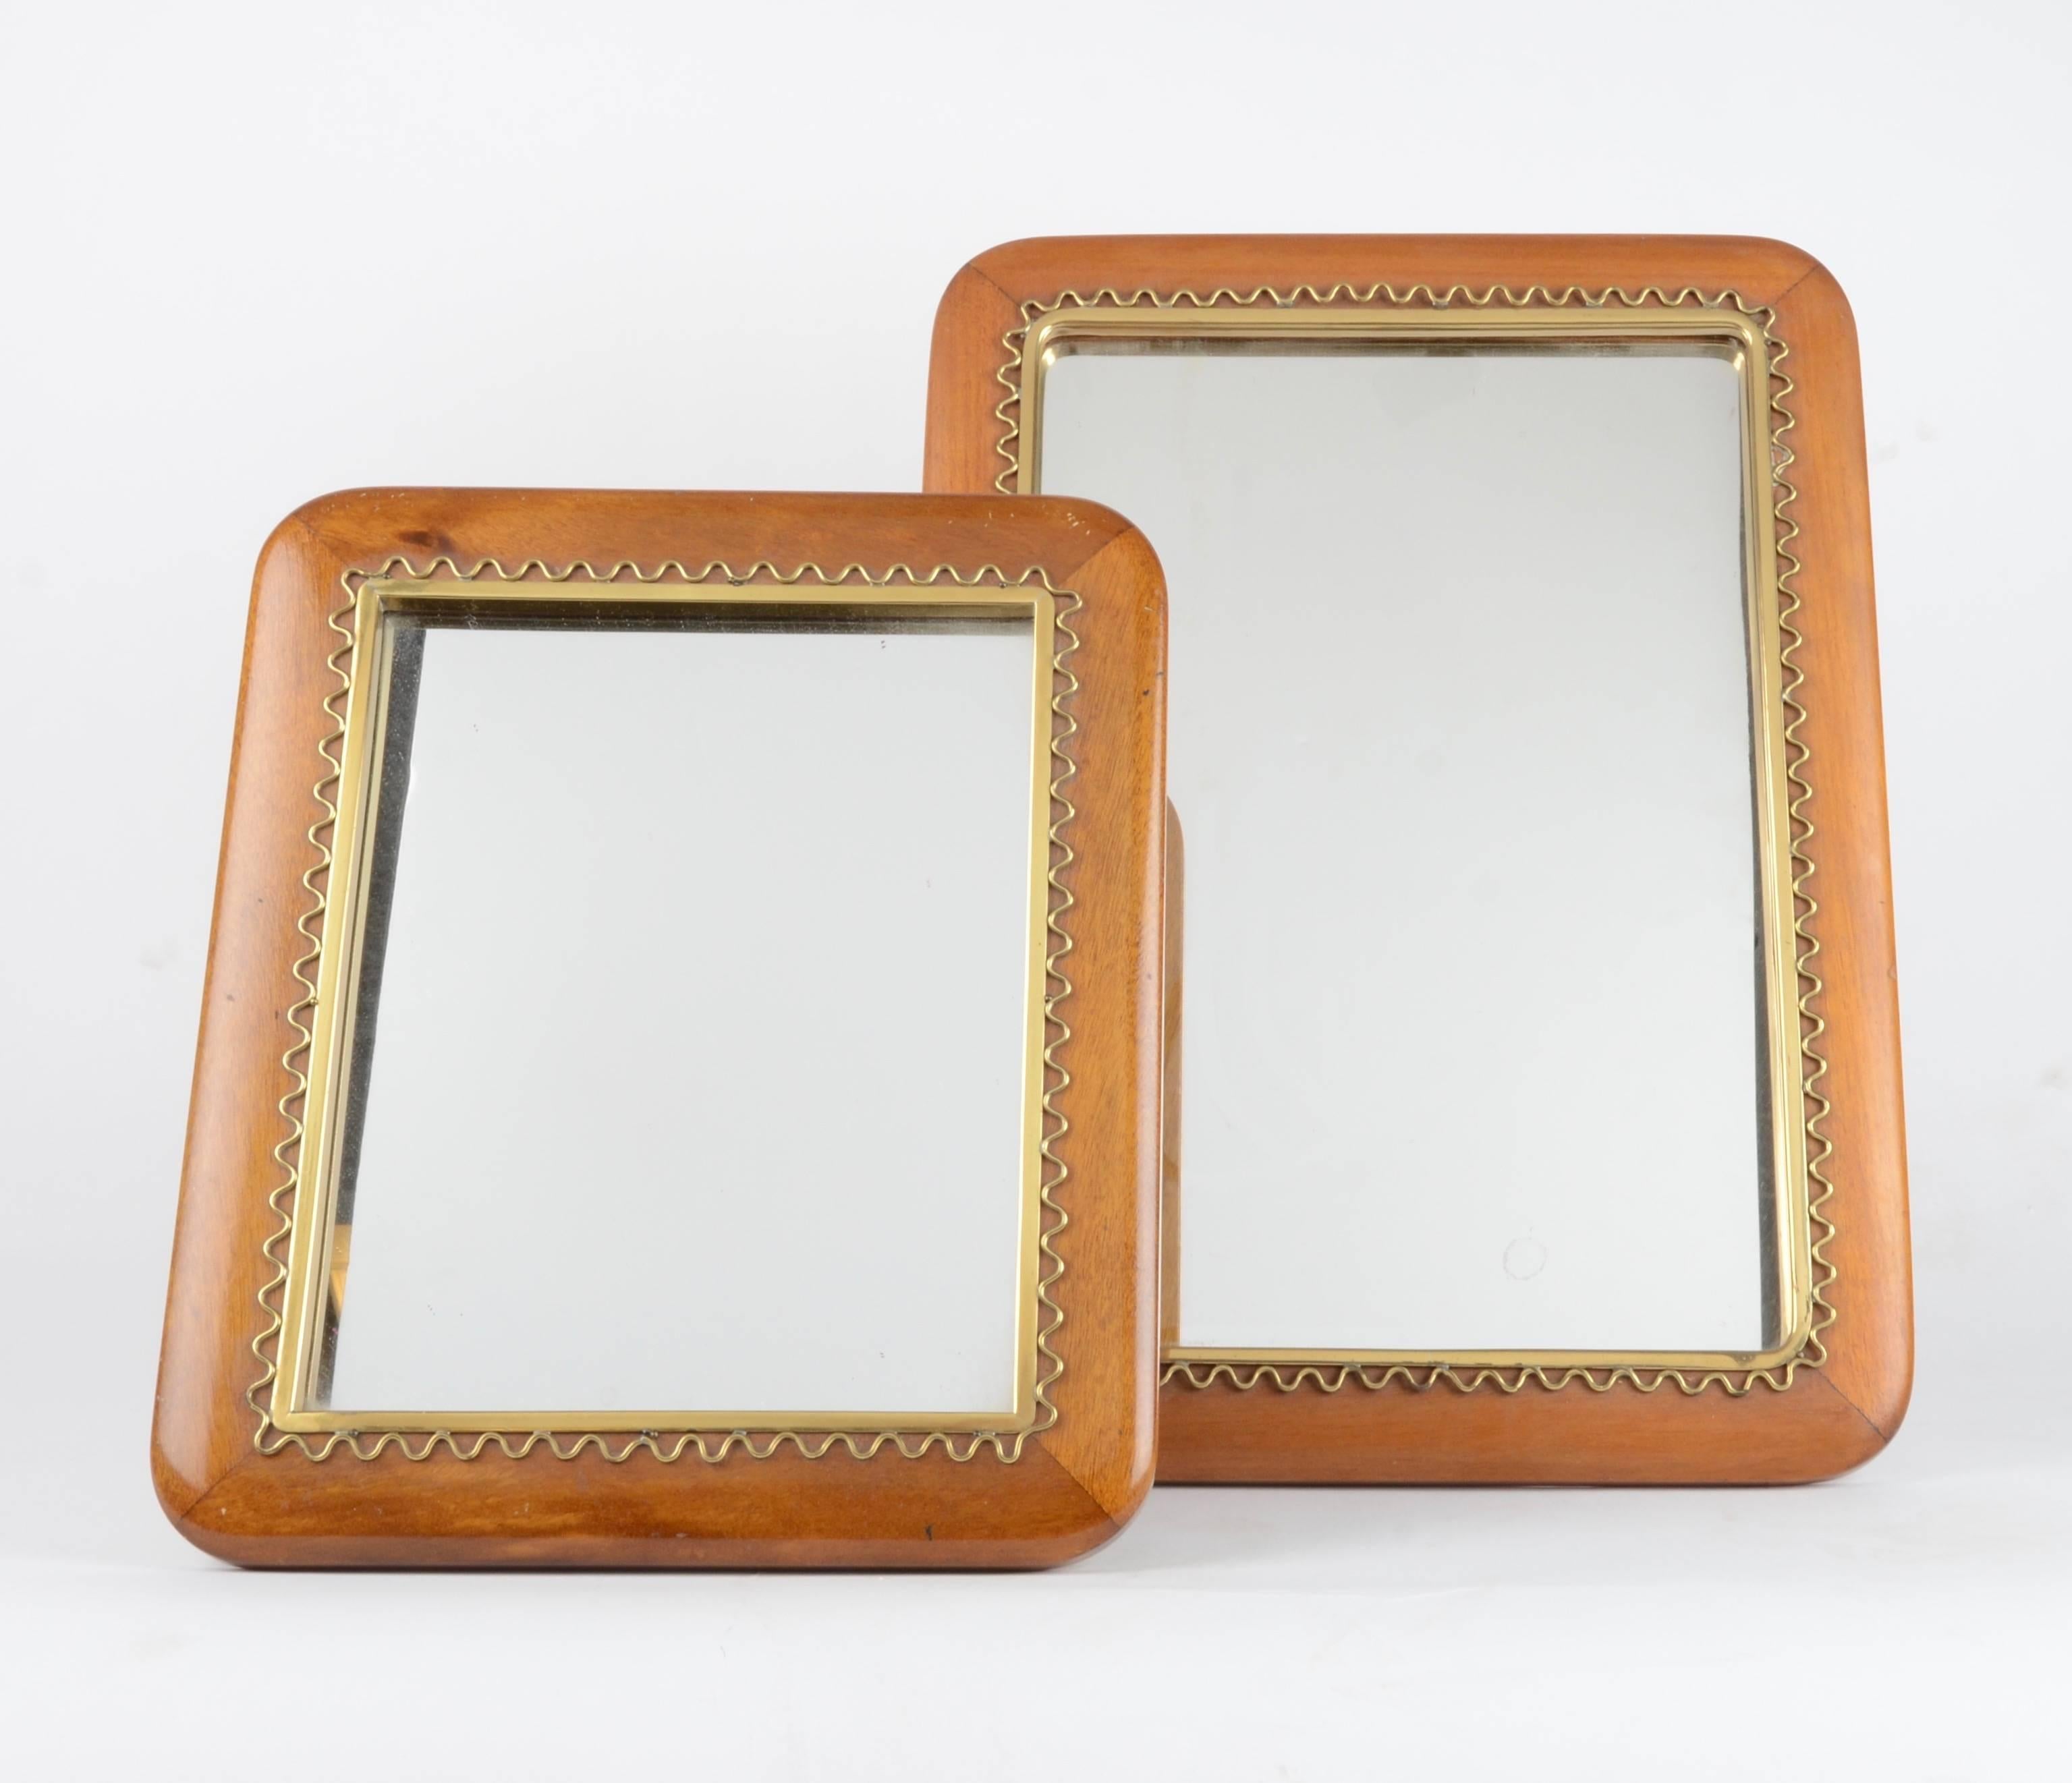 A pair of mirrors for table or wall in mahogany and brass. Designed by Josef Frank for Firma Svenskt Tenn, mid-1900s.